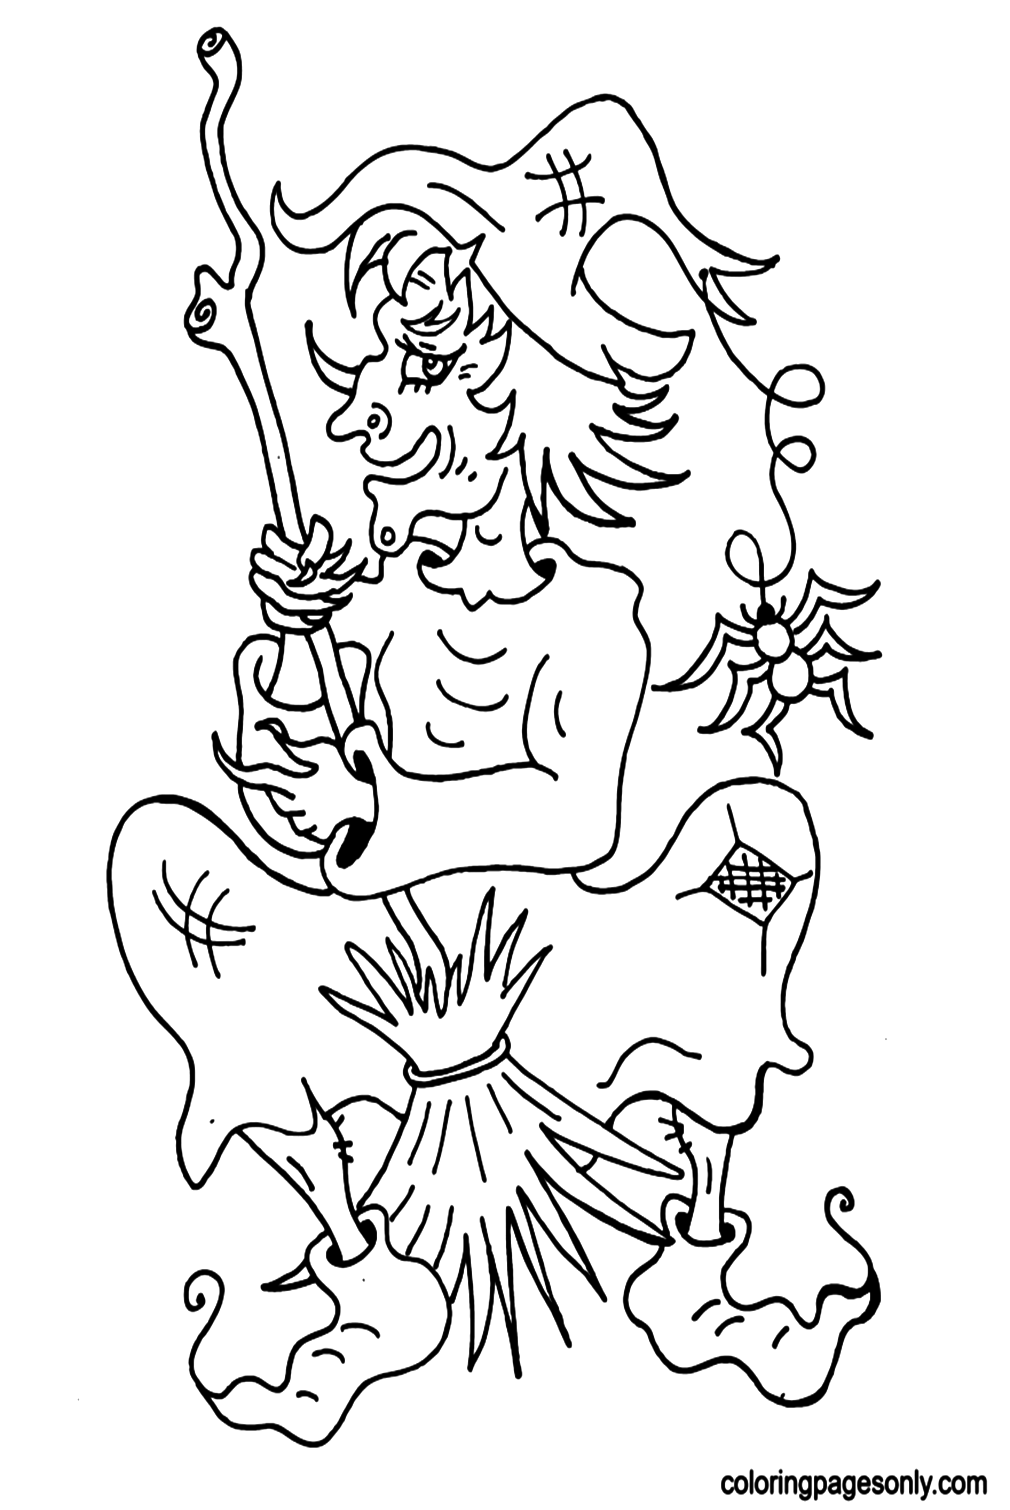 Ugly and Evil Witch Coloring Page